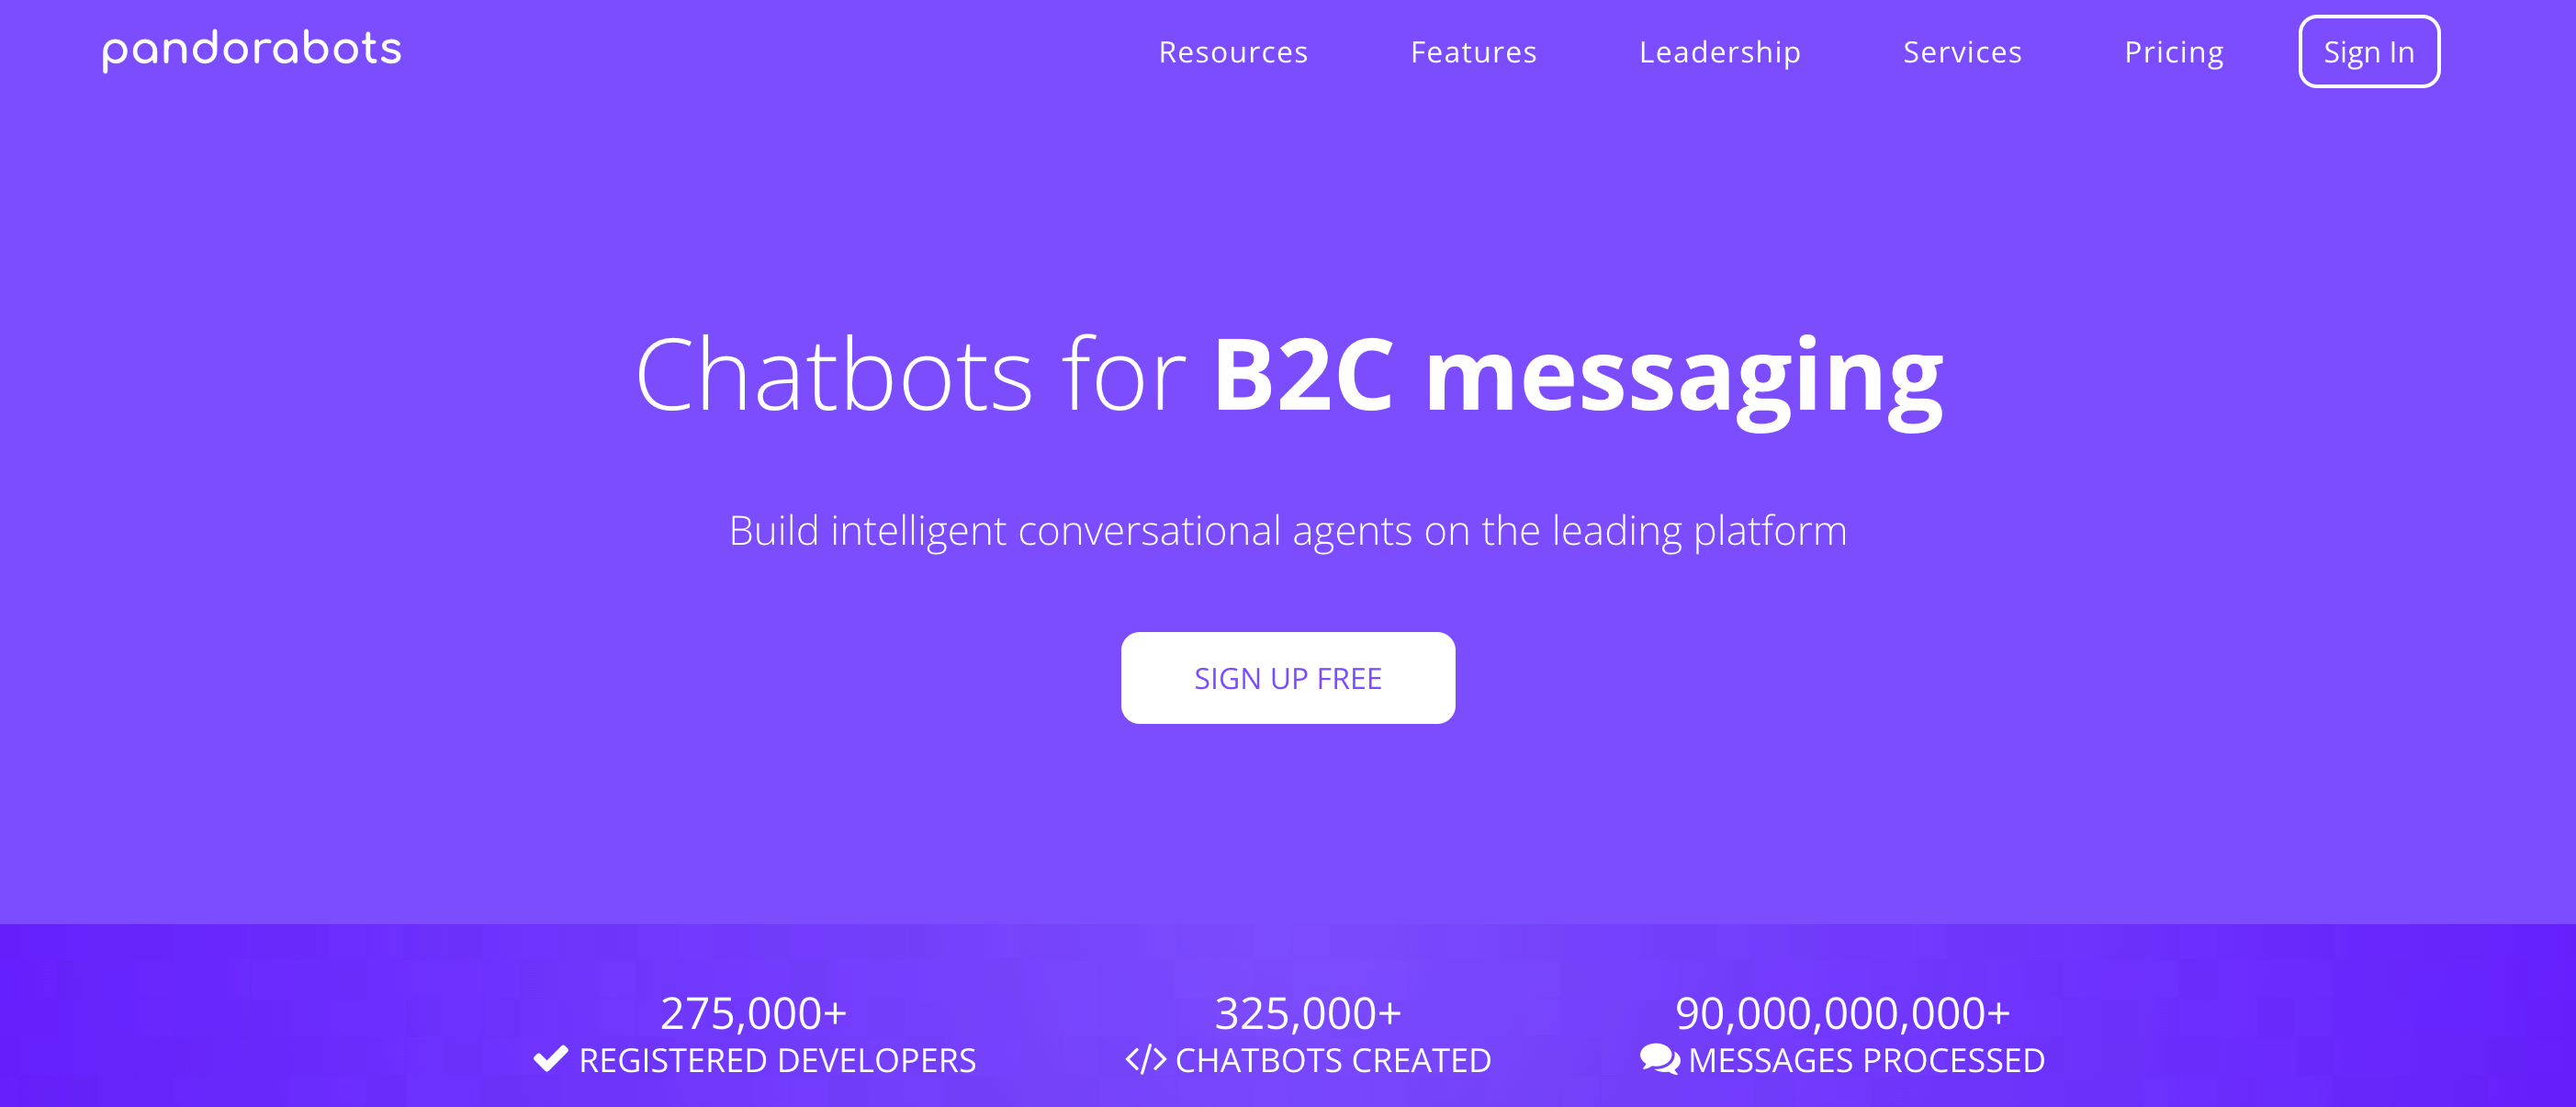 The Pandorabots home page, featuring a headline that says, “Chatbots for B2C messaging.”